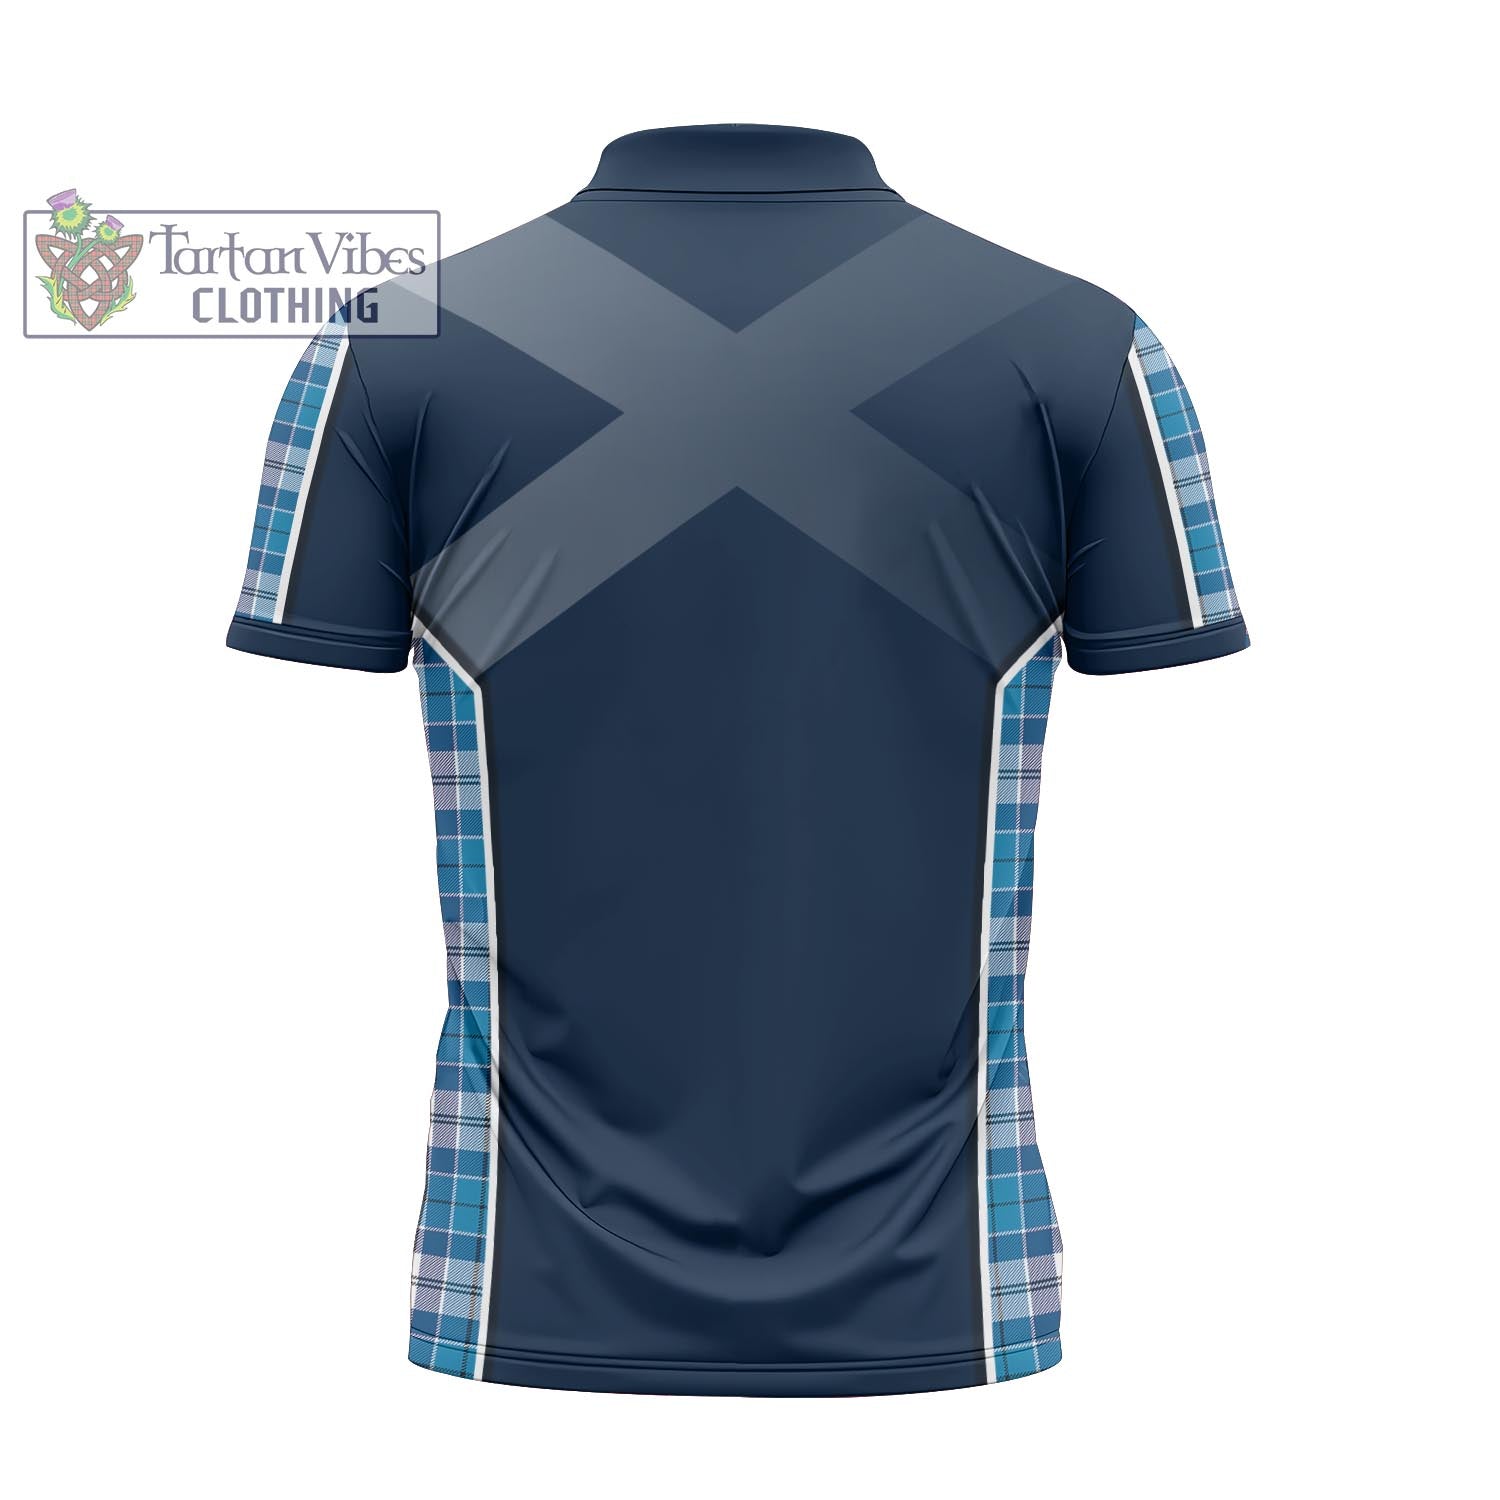 Tartan Vibes Clothing Roberton Tartan Zipper Polo Shirt with Family Crest and Scottish Thistle Vibes Sport Style